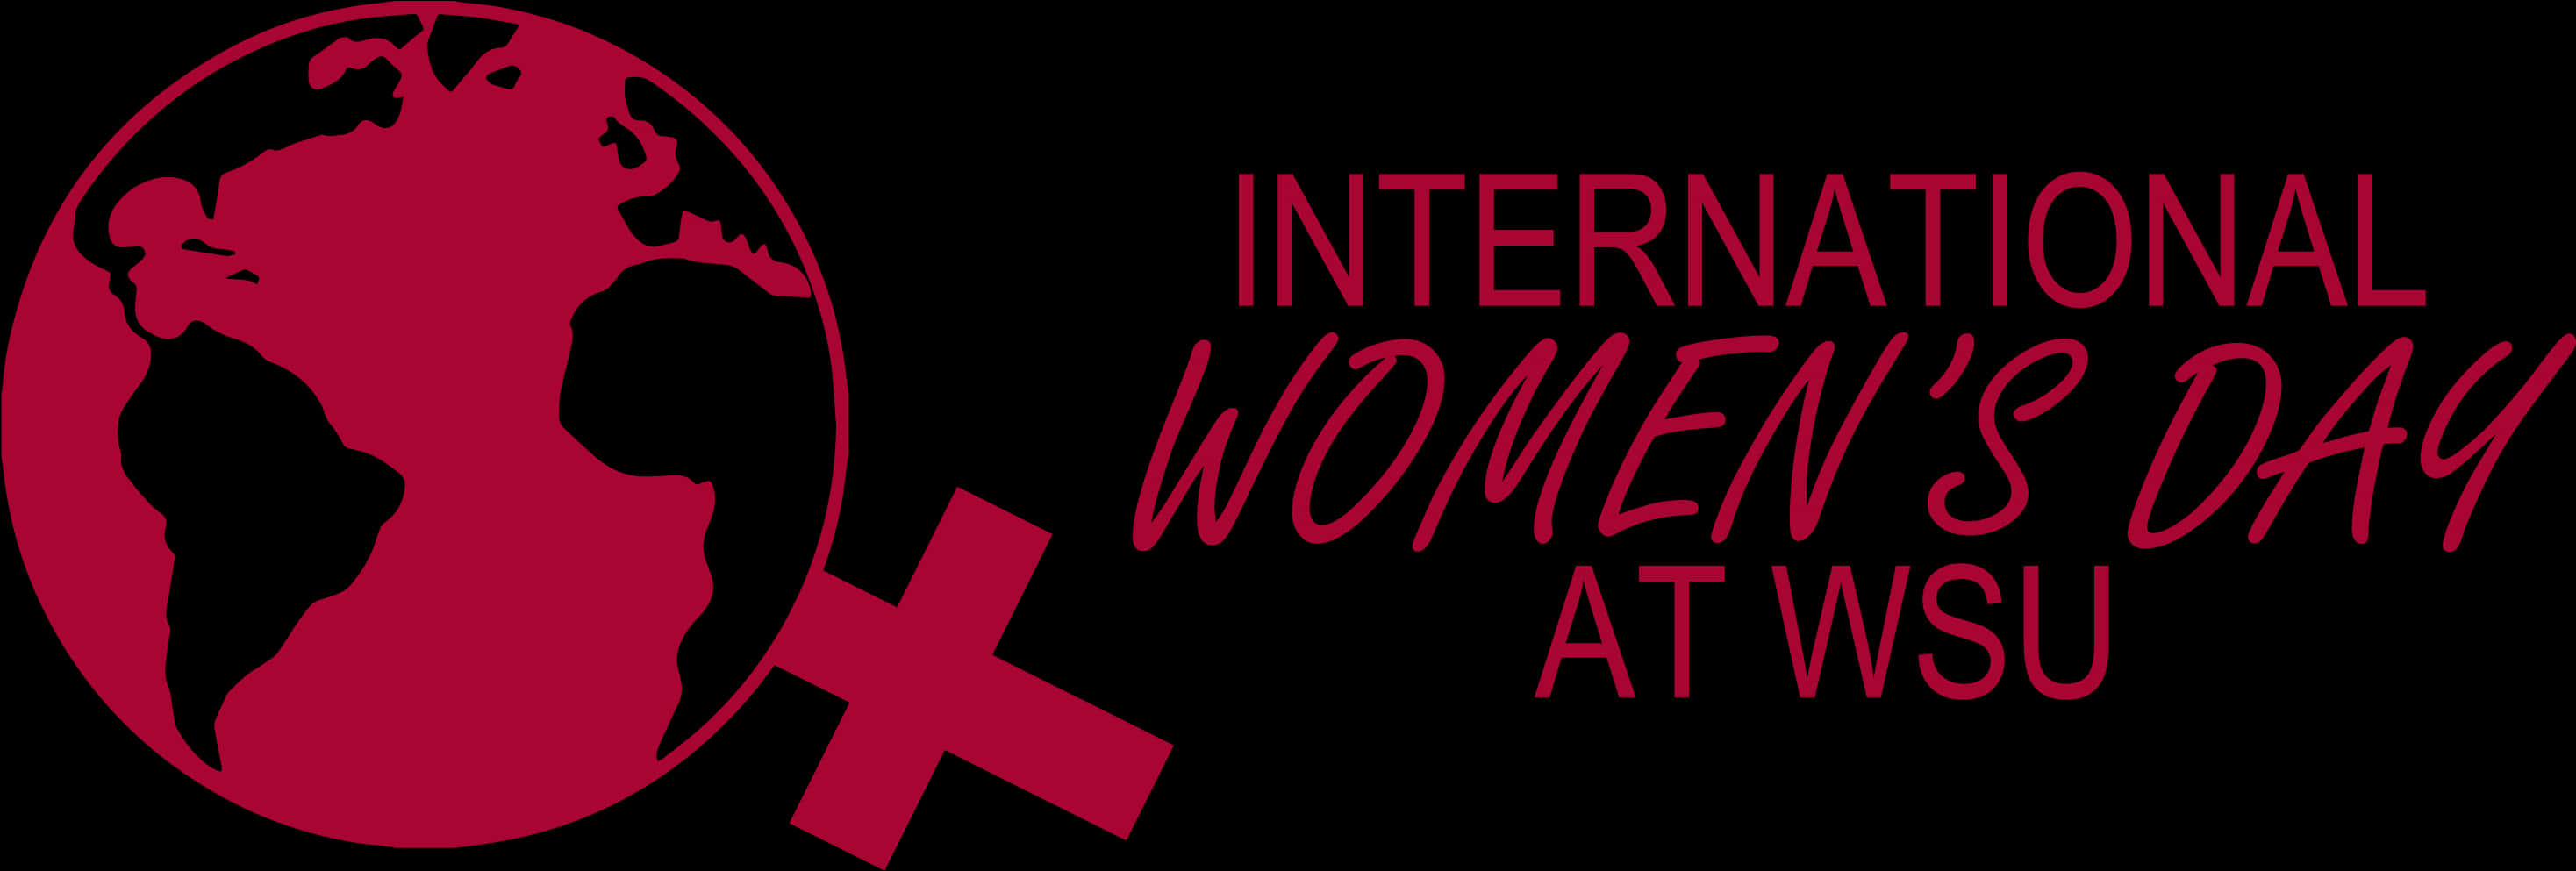 International Womens Day W S U Event Banner PNG